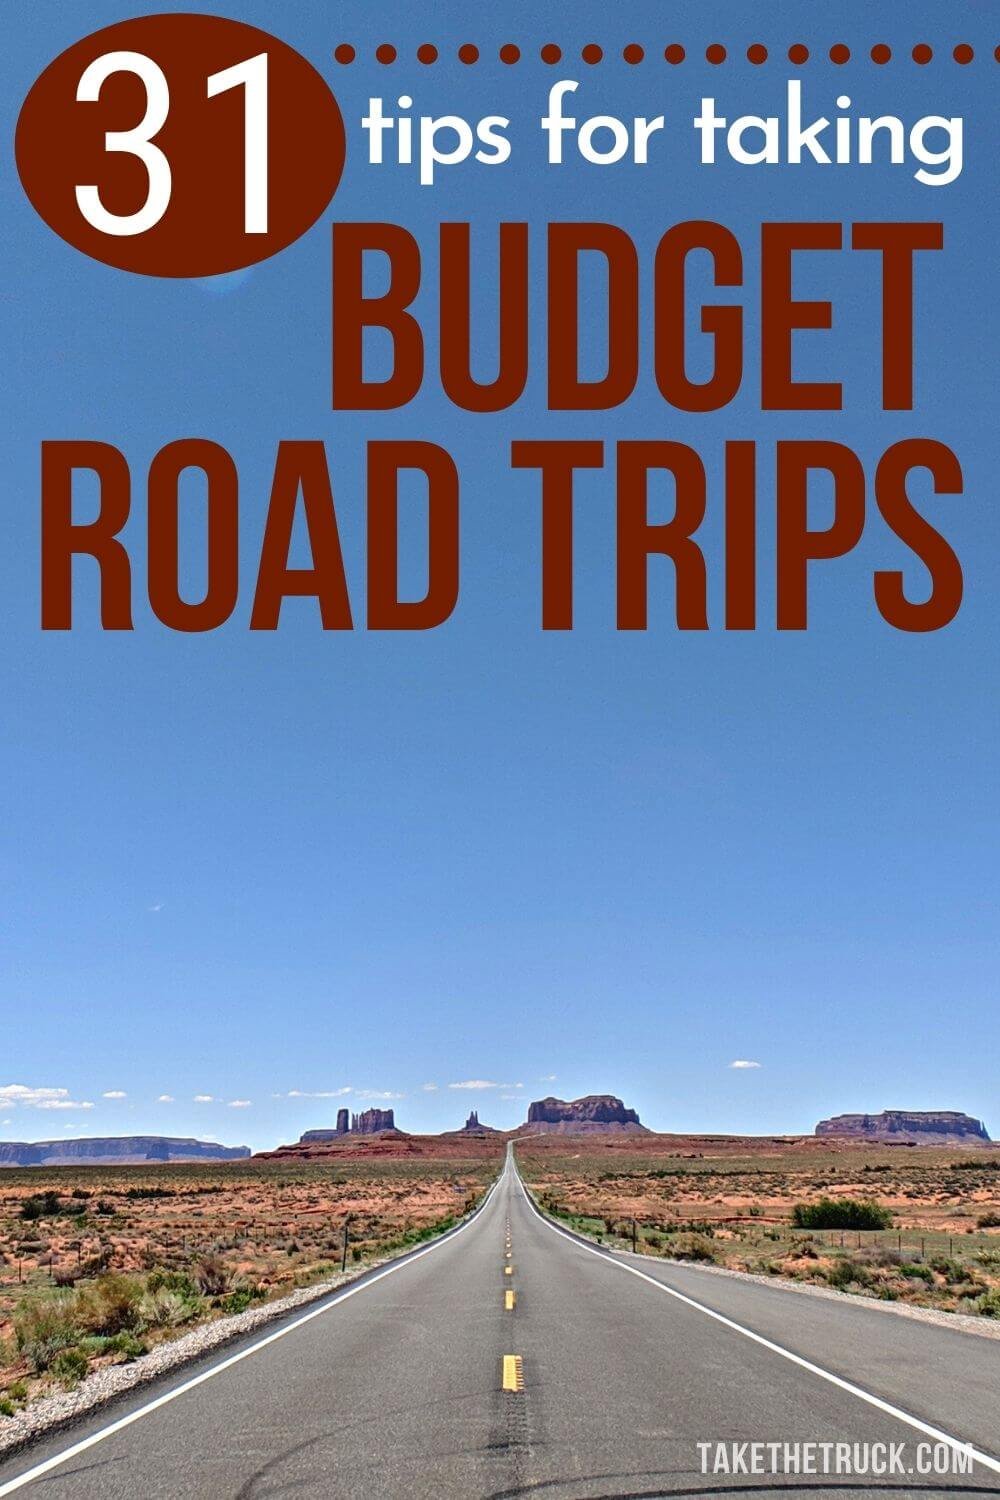 31 budget road trip travel hacks, from how to plan a road trip on a budget, to budget road trip food, cheap road trip ideas, budget road trip meals, how to road trip on a budget with kids, and more!